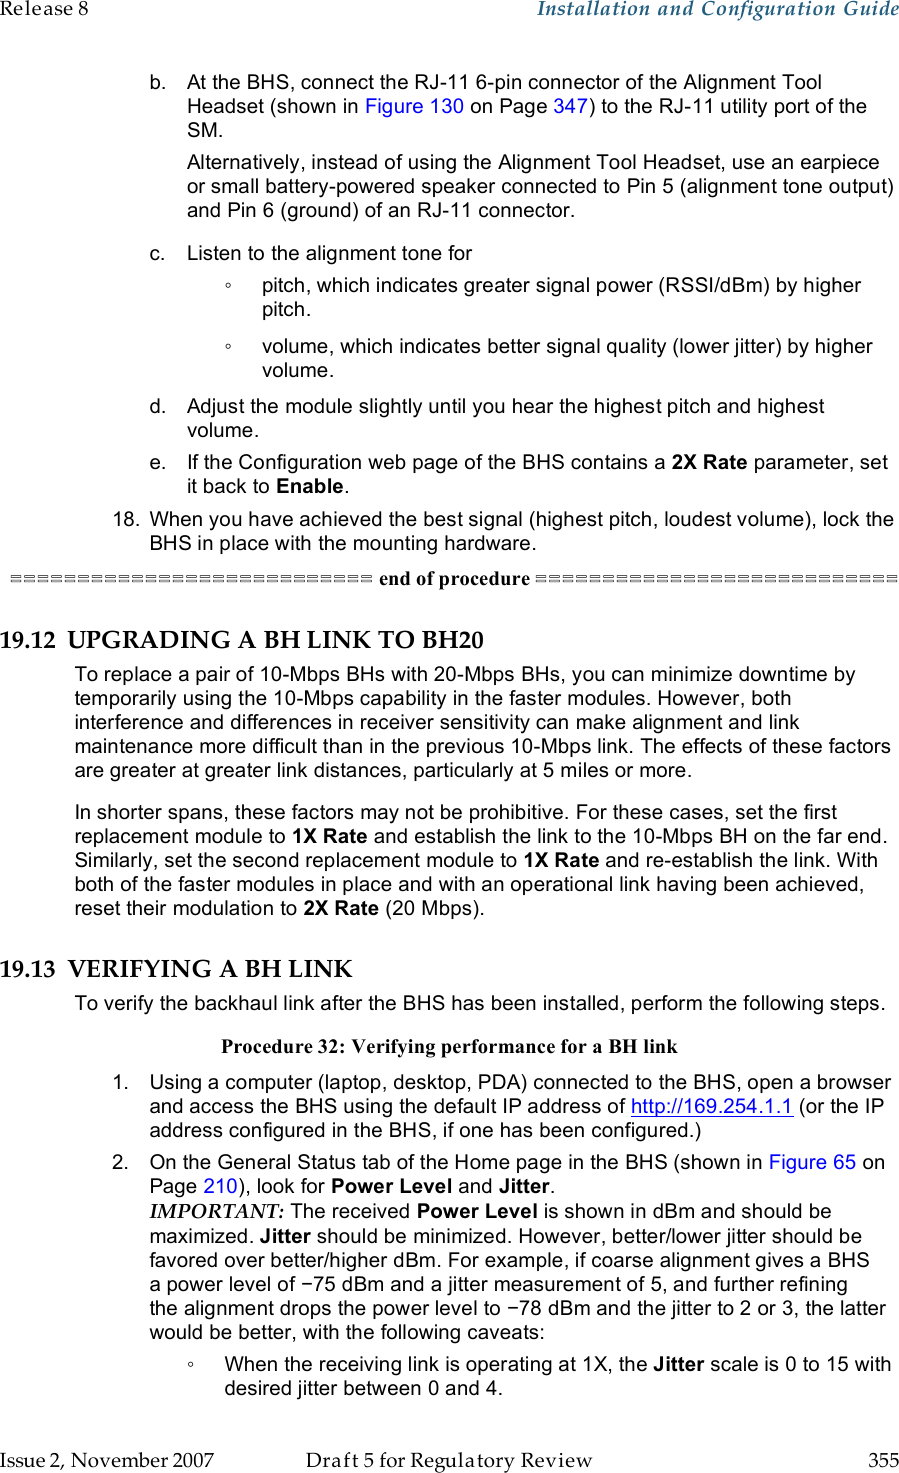 Release 8    Installation and Configuration Guide   Issue 2, November 2007  Draft 5 for Regulatory Review  355     b.  At the BHS, connect the RJ-11 6-pin connector of the Alignment Tool Headset (shown in Figure 130 on Page 347) to the RJ-11 utility port of the SM. Alternatively, instead of using the Alignment Tool Headset, use an earpiece or small battery-powered speaker connected to Pin 5 (alignment tone output) and Pin 6 (ground) of an RJ-11 connector. c.  Listen to the alignment tone for ◦  pitch, which indicates greater signal power (RSSI/dBm) by higher pitch. ◦  volume, which indicates better signal quality (lower jitter) by higher volume. d.  Adjust the module slightly until you hear the highest pitch and highest volume. e.  If the Configuration web page of the BHS contains a 2X Rate parameter, set it back to Enable. 18.  When you have achieved the best signal (highest pitch, loudest volume), lock the BHS in place with the mounting hardware. =========================== end of procedure =========================== 19.12 UPGRADING A BH LINK TO BH20 To replace a pair of 10-Mbps BHs with 20-Mbps BHs, you can minimize downtime by temporarily using the 10-Mbps capability in the faster modules. However, both interference and differences in receiver sensitivity can make alignment and link maintenance more difficult than in the previous 10-Mbps link. The effects of these factors are greater at greater link distances, particularly at 5 miles or more. In shorter spans, these factors may not be prohibitive. For these cases, set the first replacement module to 1X Rate and establish the link to the 10-Mbps BH on the far end. Similarly, set the second replacement module to 1X Rate and re-establish the link. With both of the faster modules in place and with an operational link having been achieved, reset their modulation to 2X Rate (20 Mbps).  19.13 VERIFYING A BH LINK To verify the backhaul link after the BHS has been installed, perform the following steps. Procedure 32: Verifying performance for a BH link 1.  Using a computer (laptop, desktop, PDA) connected to the BHS, open a browser and access the BHS using the default IP address of http://169.254.1.1 (or the IP address configured in the BHS, if one has been configured.) 2.  On the General Status tab of the Home page in the BHS (shown in Figure 65 on Page 210), look for Power Level and Jitter.  IMPORTANT: The received Power Level is shown in dBm and should be maximized. Jitter should be minimized. However, better/lower jitter should be favored over better/higher dBm. For example, if coarse alignment gives a BHS a power level of −75 dBm and a jitter measurement of 5, and further refining the alignment drops the power level to −78 dBm and the jitter to 2 or 3, the latter would be better, with the following caveats: ◦  When the receiving link is operating at 1X, the Jitter scale is 0 to 15 with desired jitter between 0 and 4.  